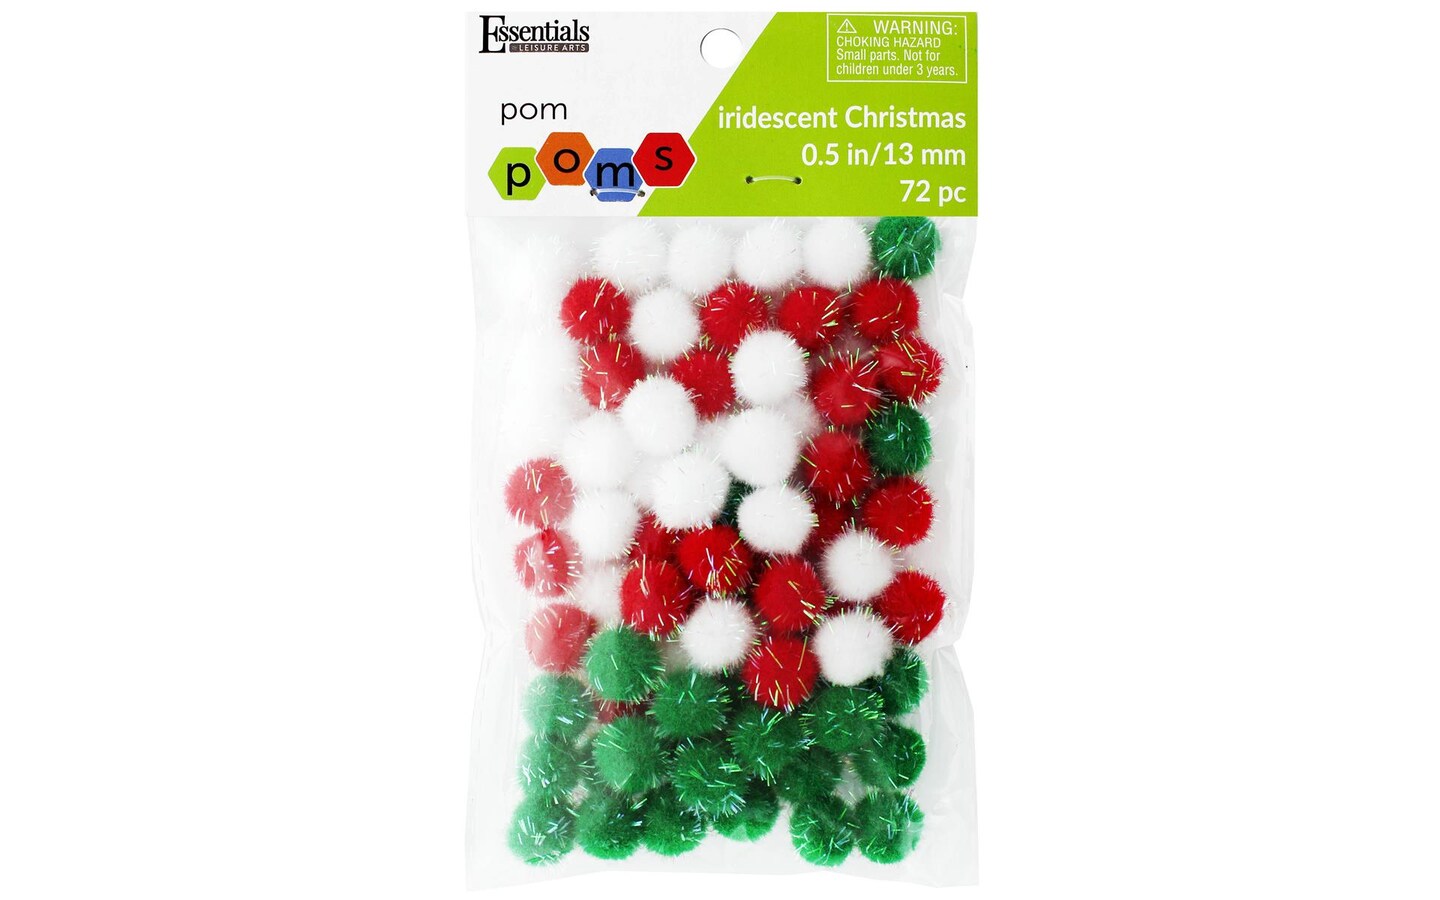 Essentials by Leisure Arts Pom Poms - Red - 7mm - 100 piece pom poms arts  and crafts - red pompoms for crafts - craft pom poms - puff balls for crafts  